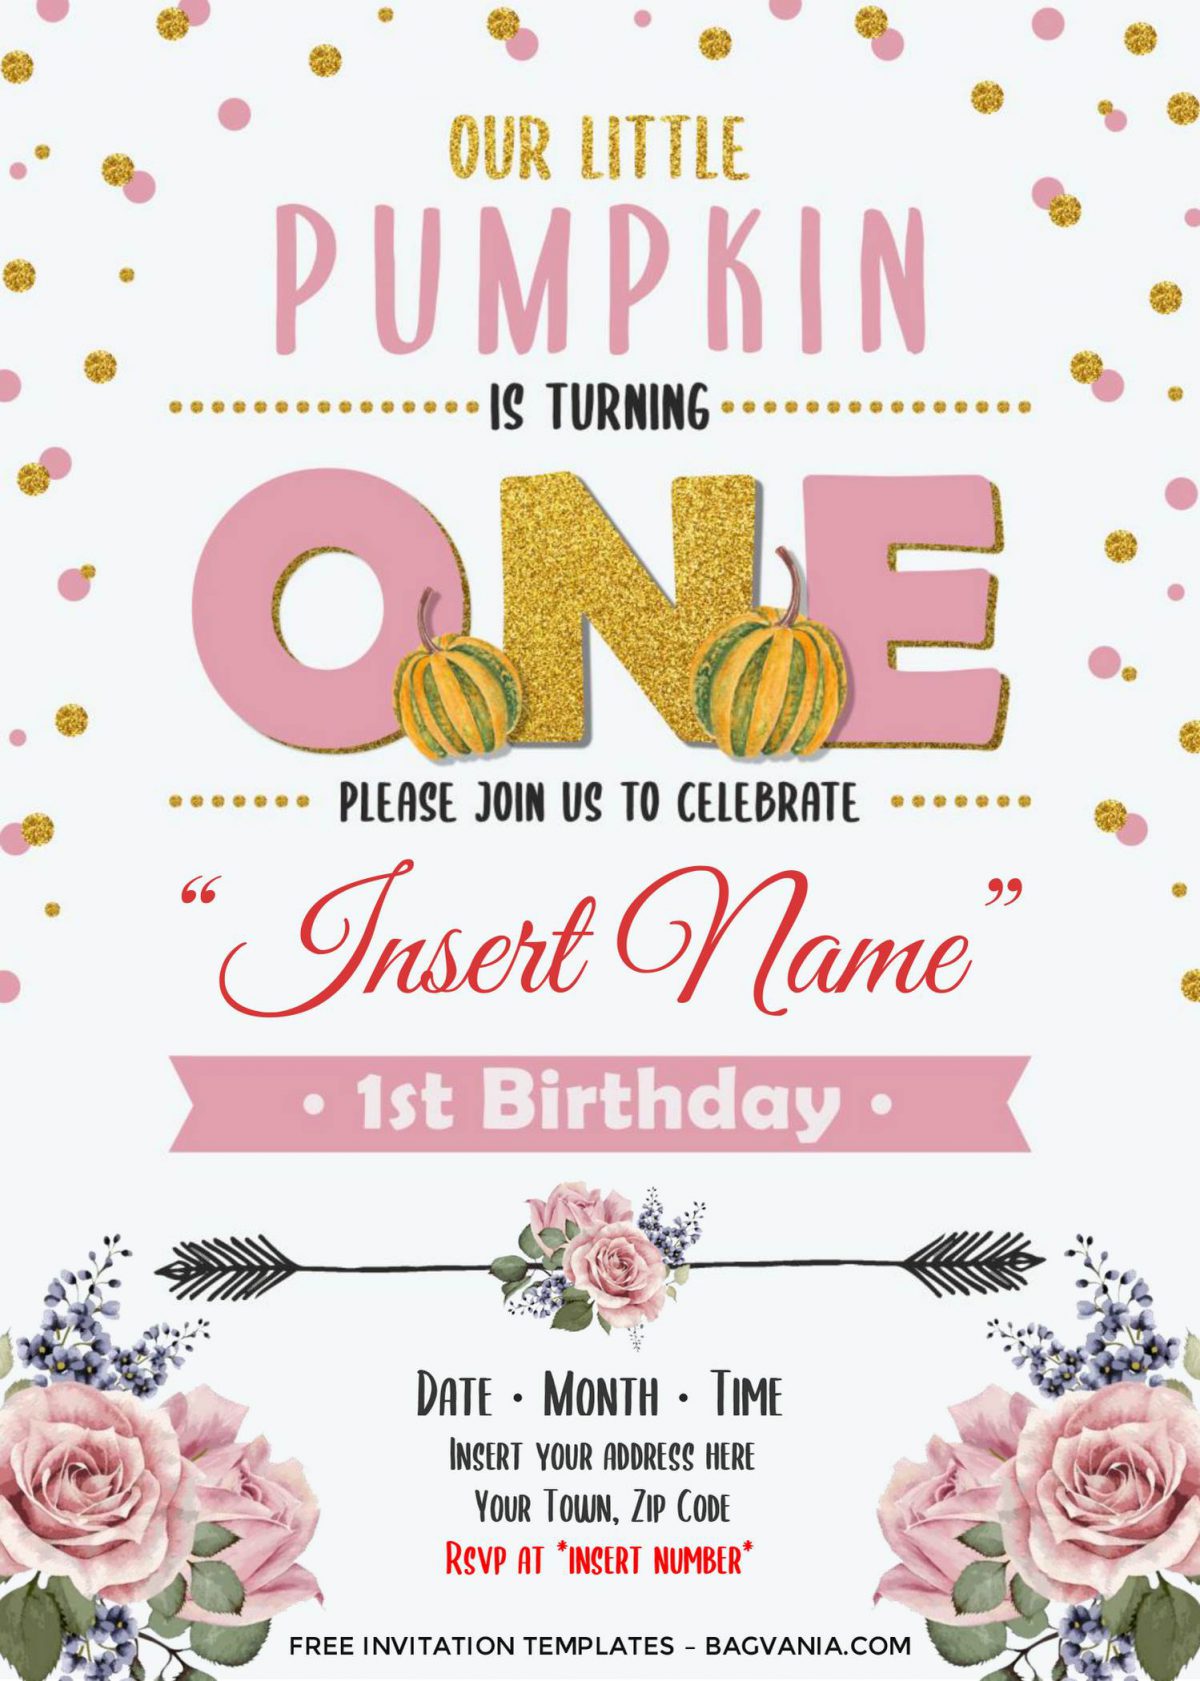 Free Pumpkin First Birthday Invitation Templates For Word and has Gold glitter text